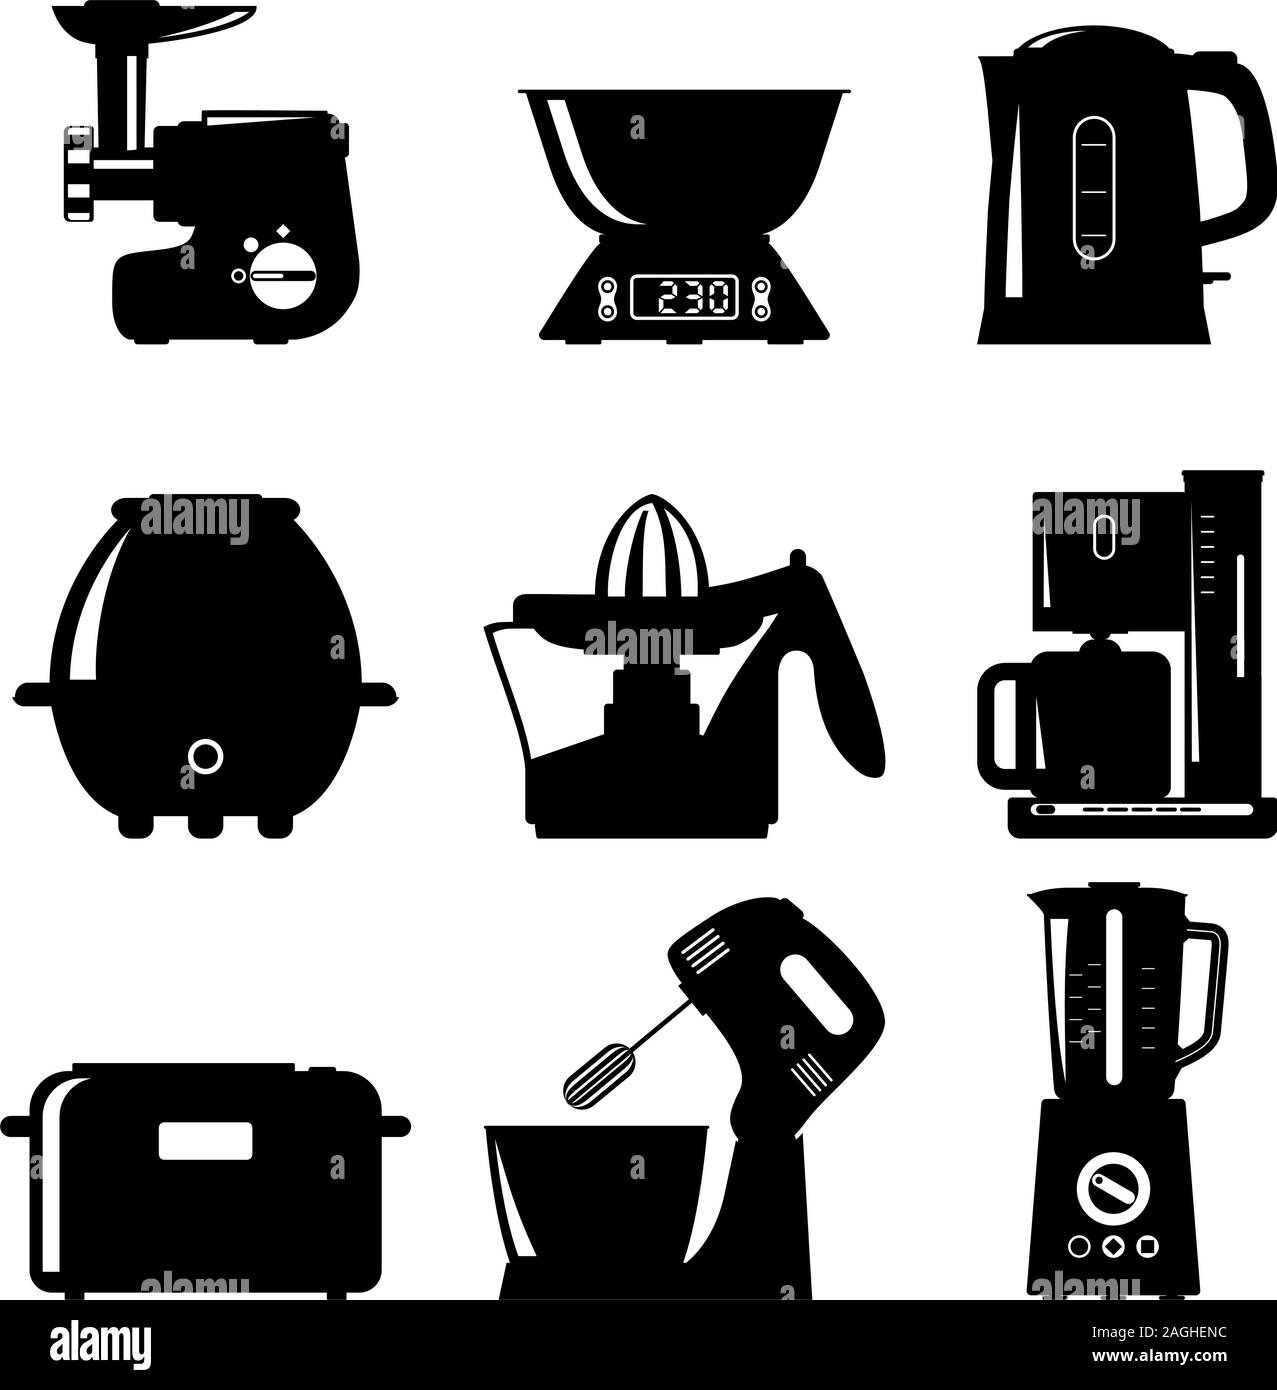 Household objects Black and White Stock Photos & Images - Alamy